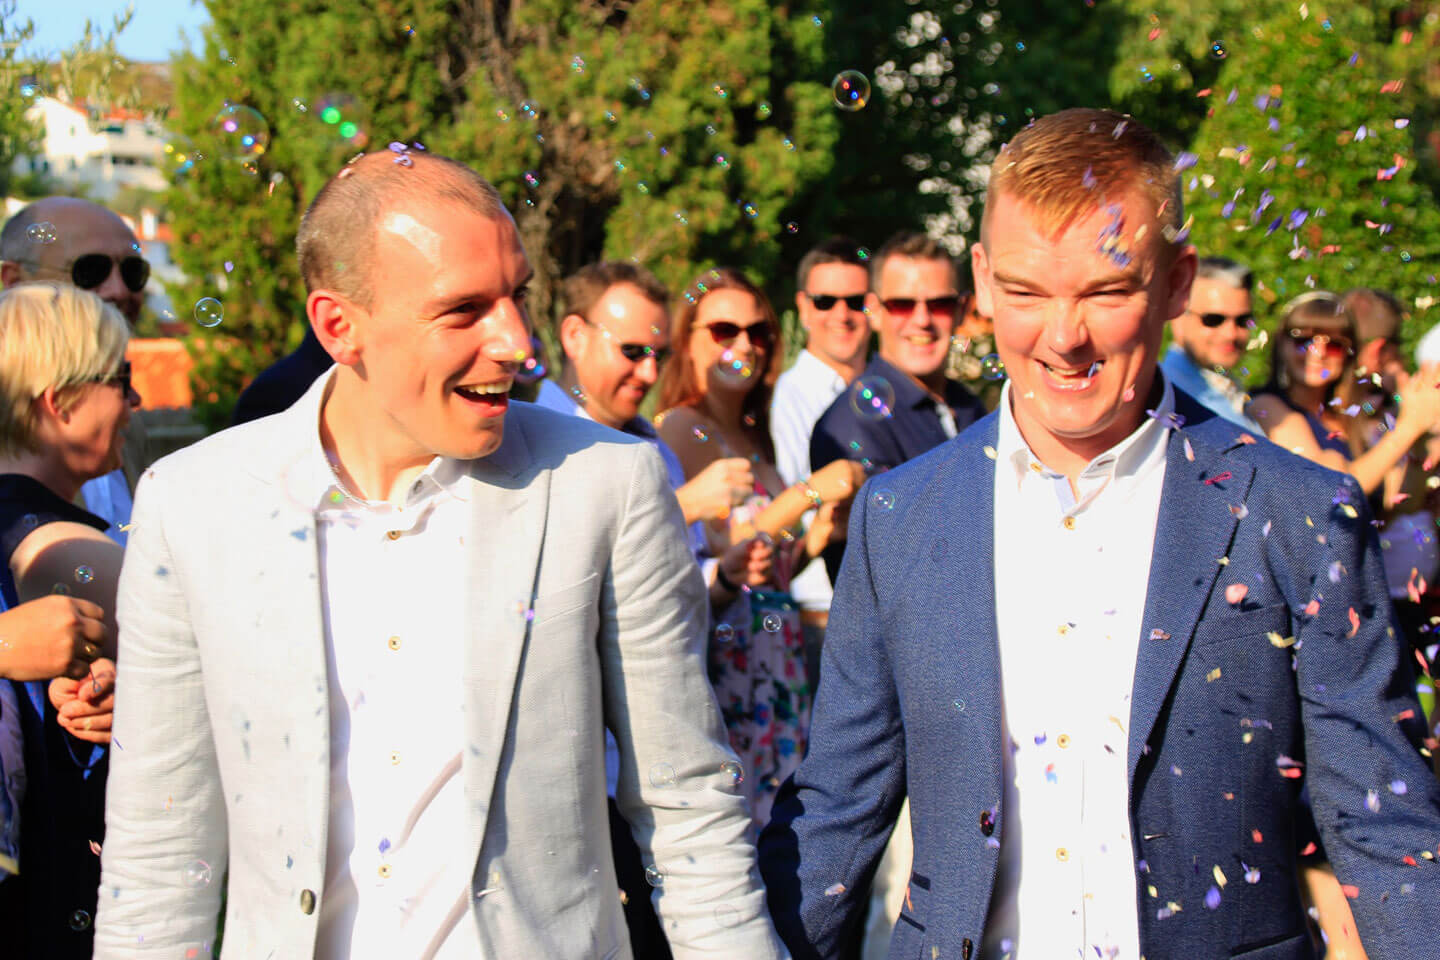 bubbles and confetti at Nick and Toms real gay wedding croatia via The Gay Wedding Guide 1 5